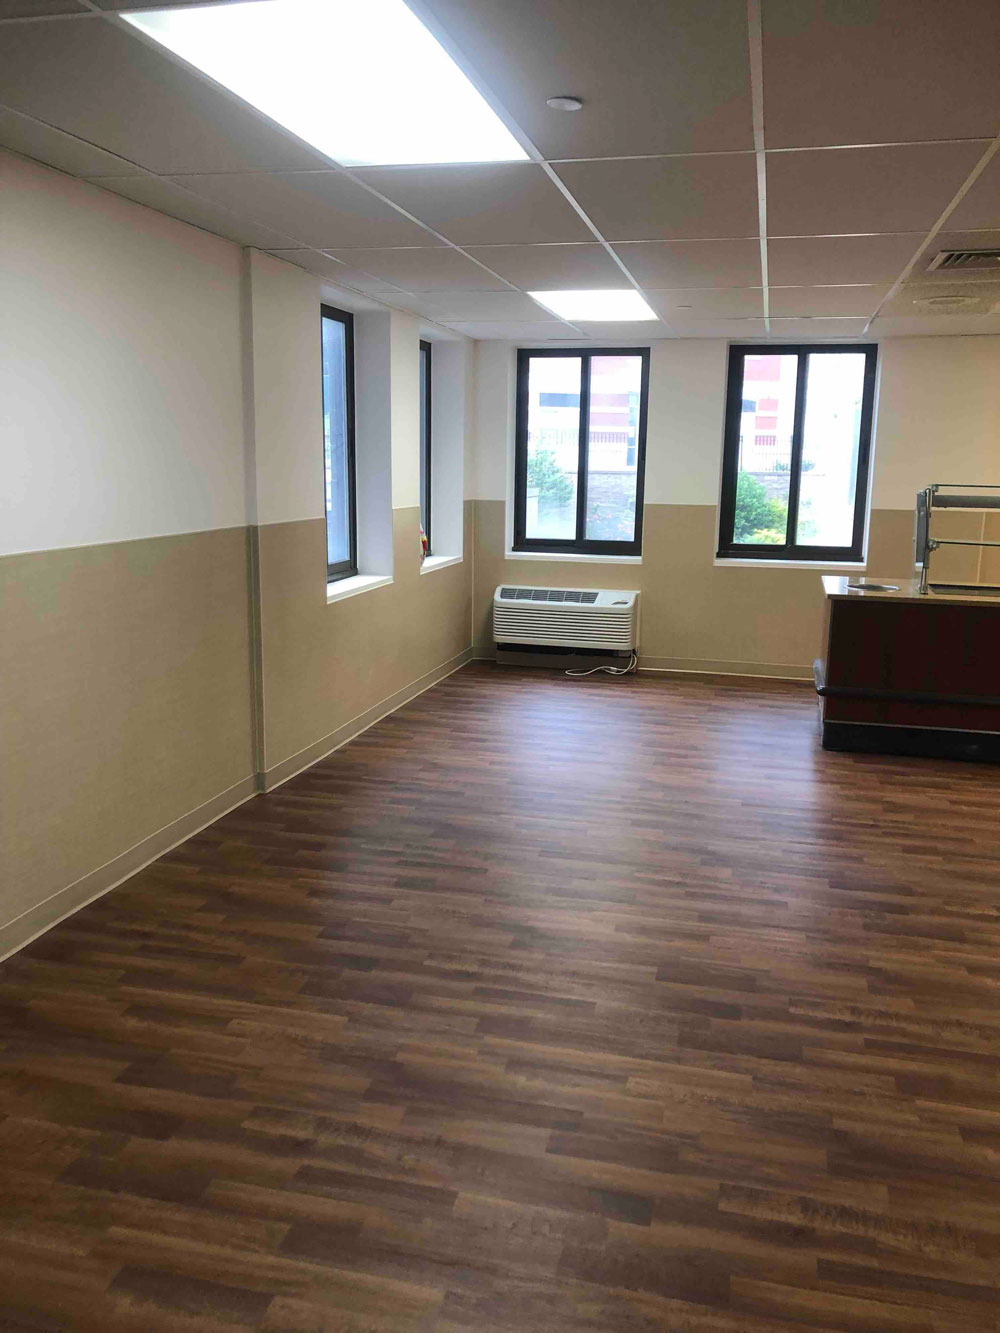 Photo showing finished common room floor, walls and windows